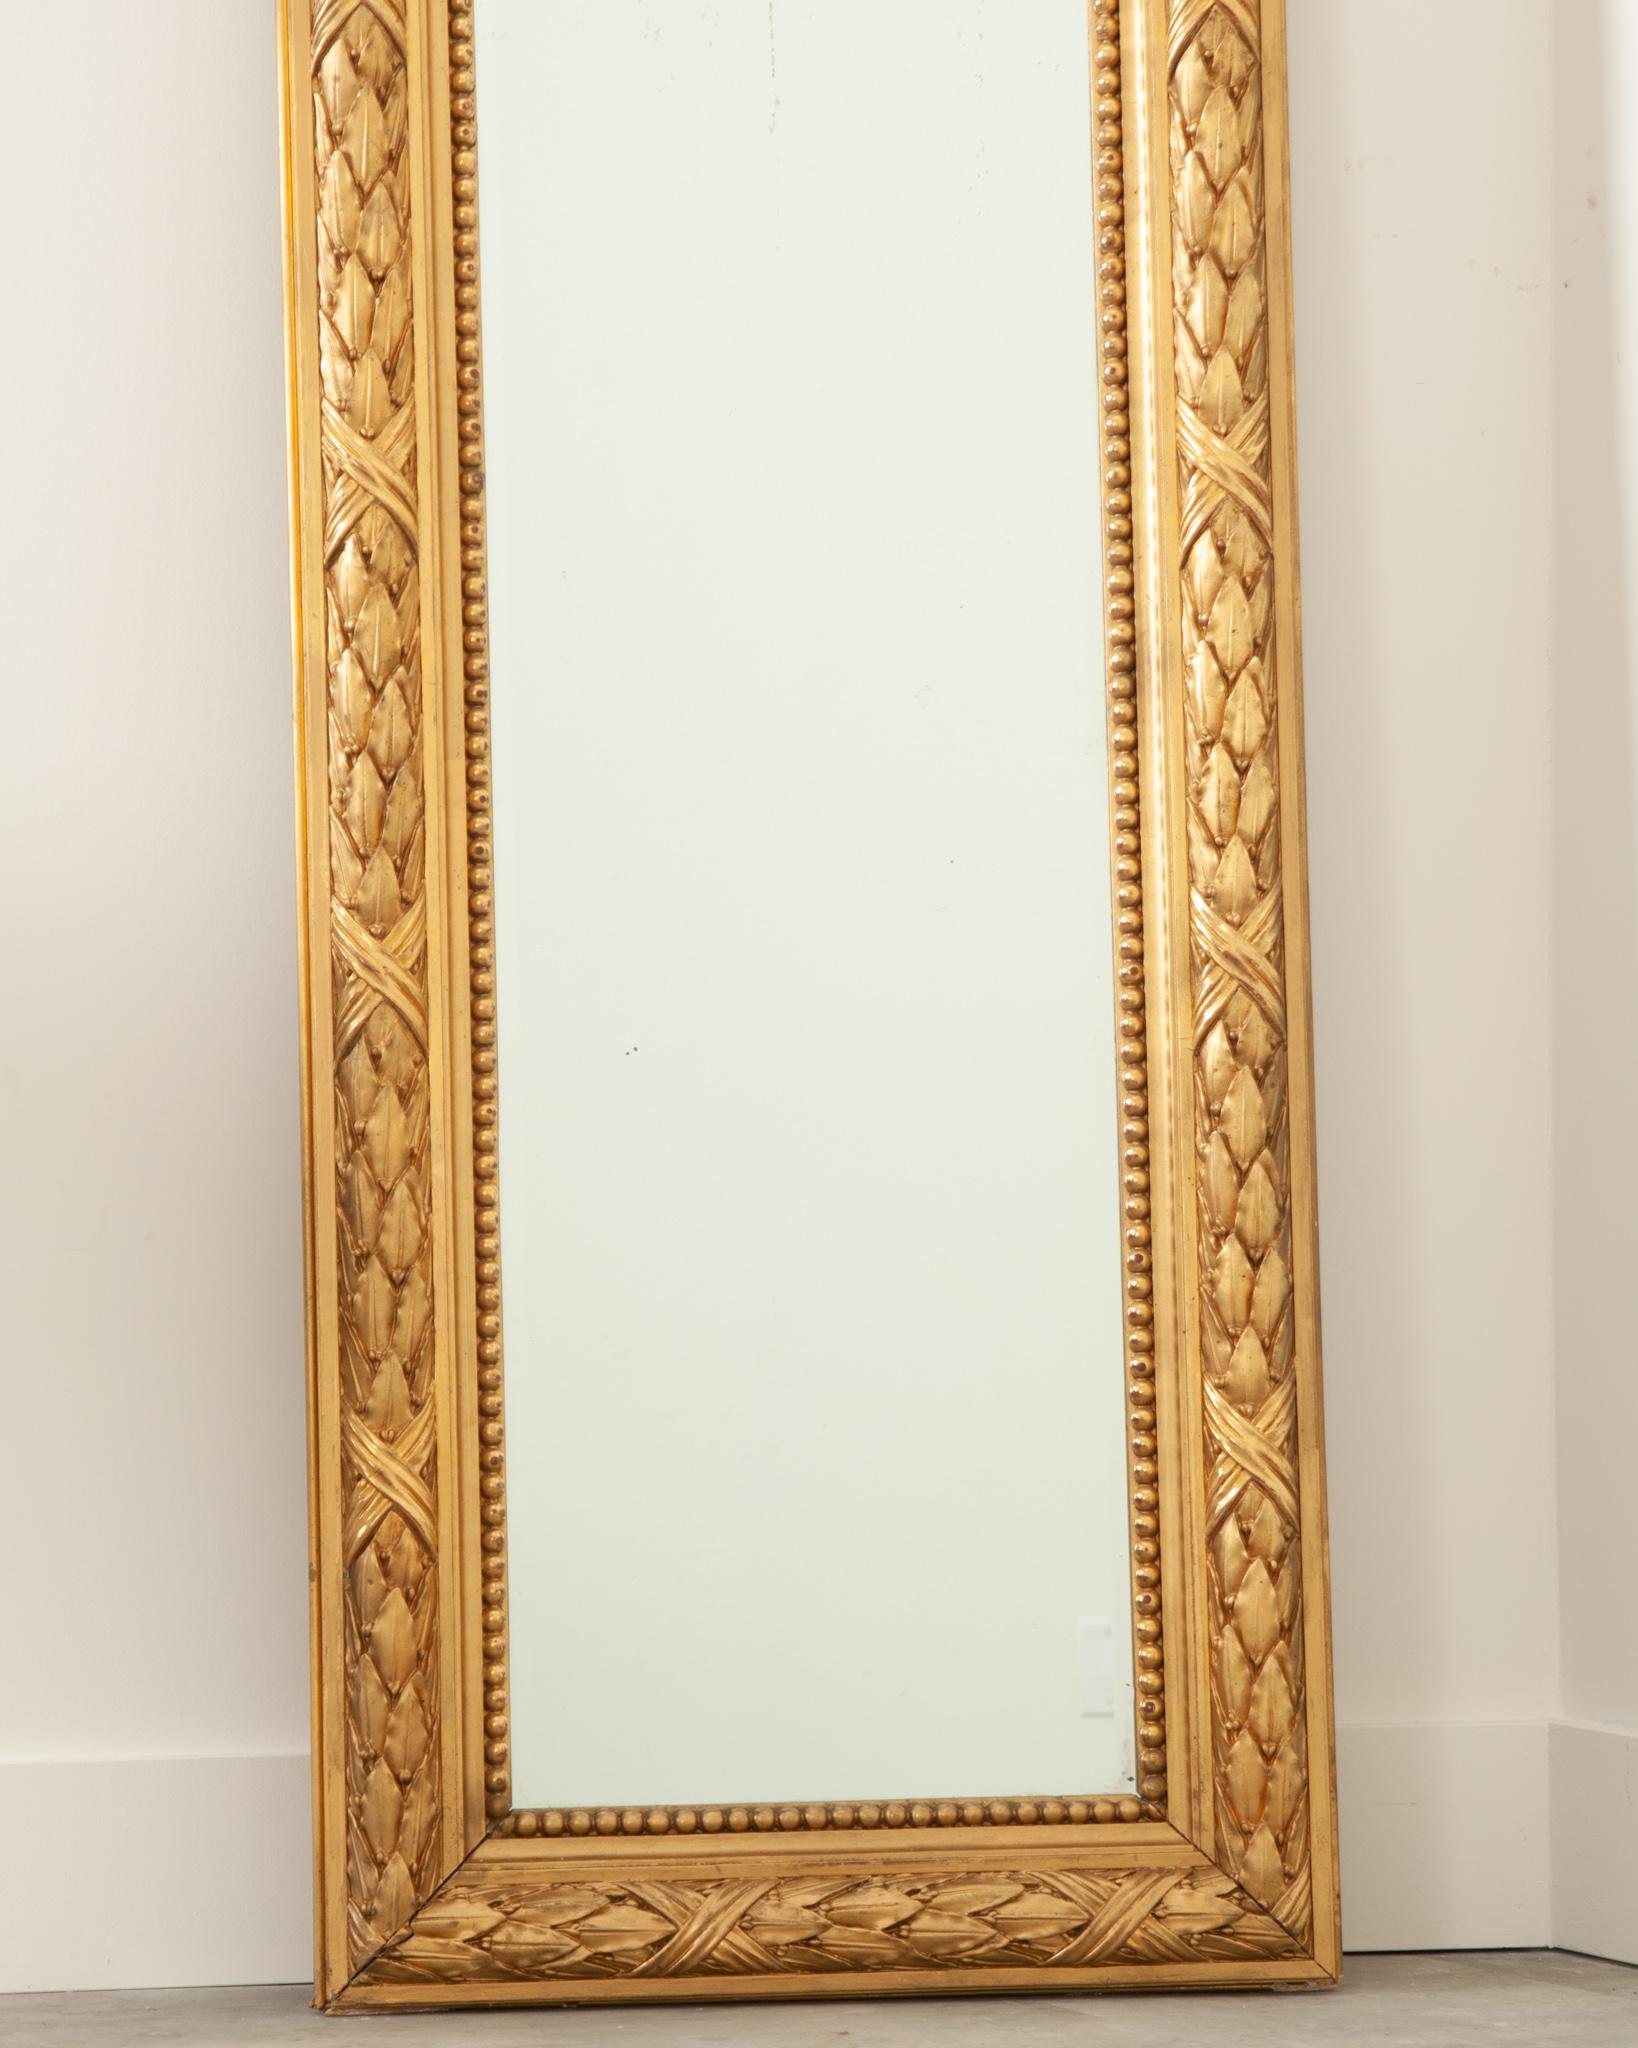 This elegant French 19th century gold gilt mirror is the perfect floor mirror for a smaller space. The beveled mirror plate is secured in a highly carved symmetrical frame, both are in wonderful antique condition with few signs of wear. Some foxing